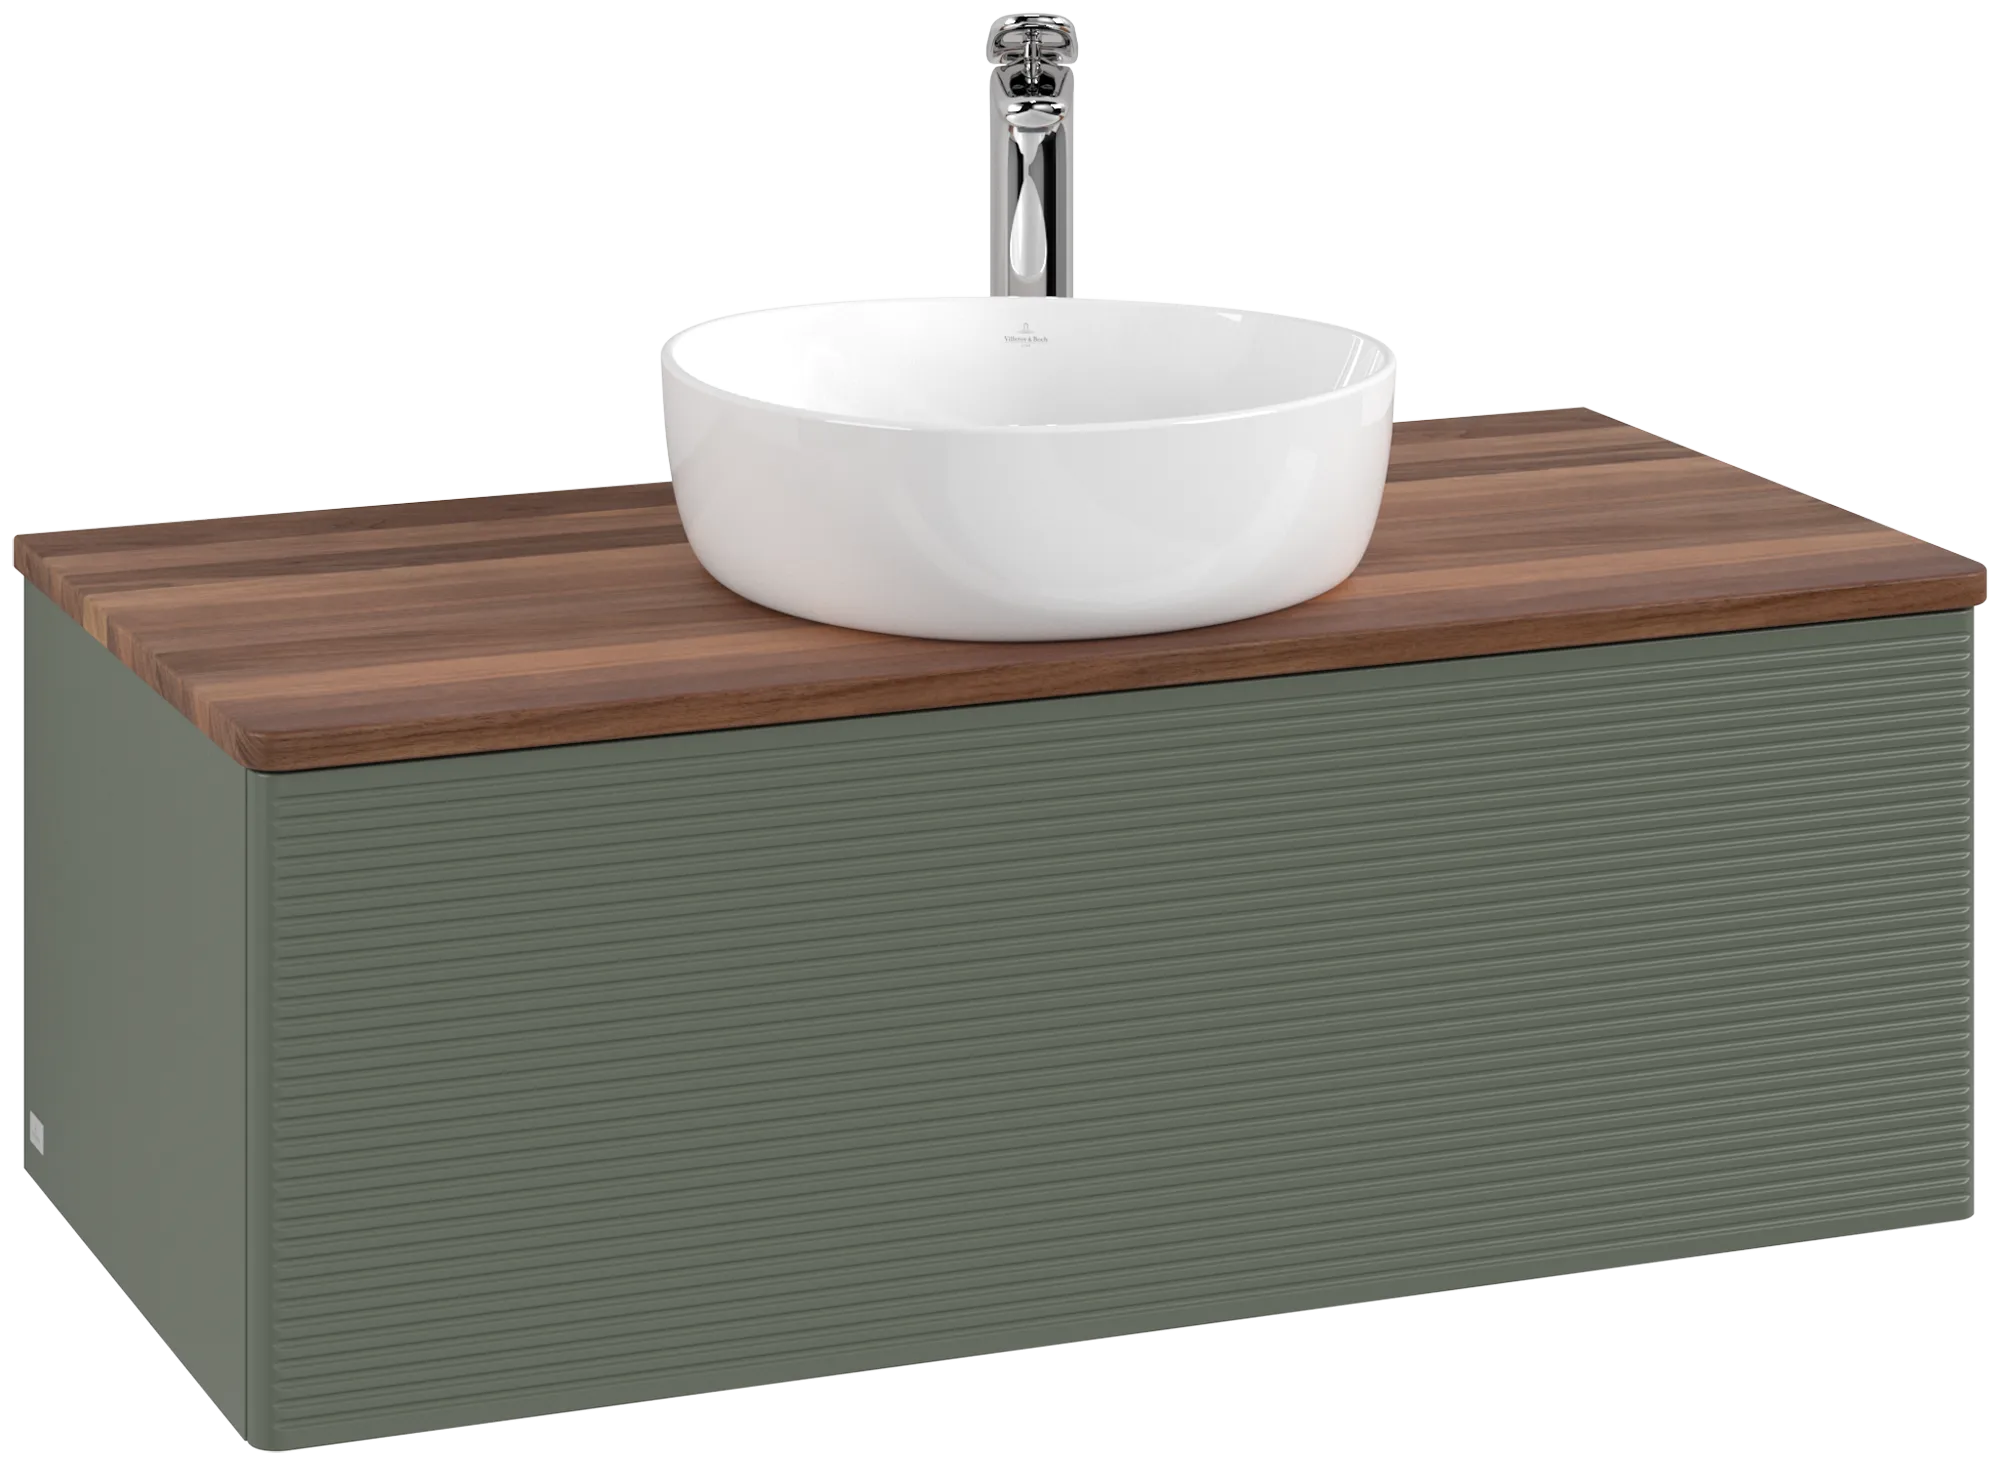 Picture of VILLEROY BOCH Antao Vanity unit, with lighting, 1 pull-out compartment, 1000 x 360 x 500 mm, Front with grain texture, Leaf Green Matt Lacquer / Warm Walnut #L31152HL